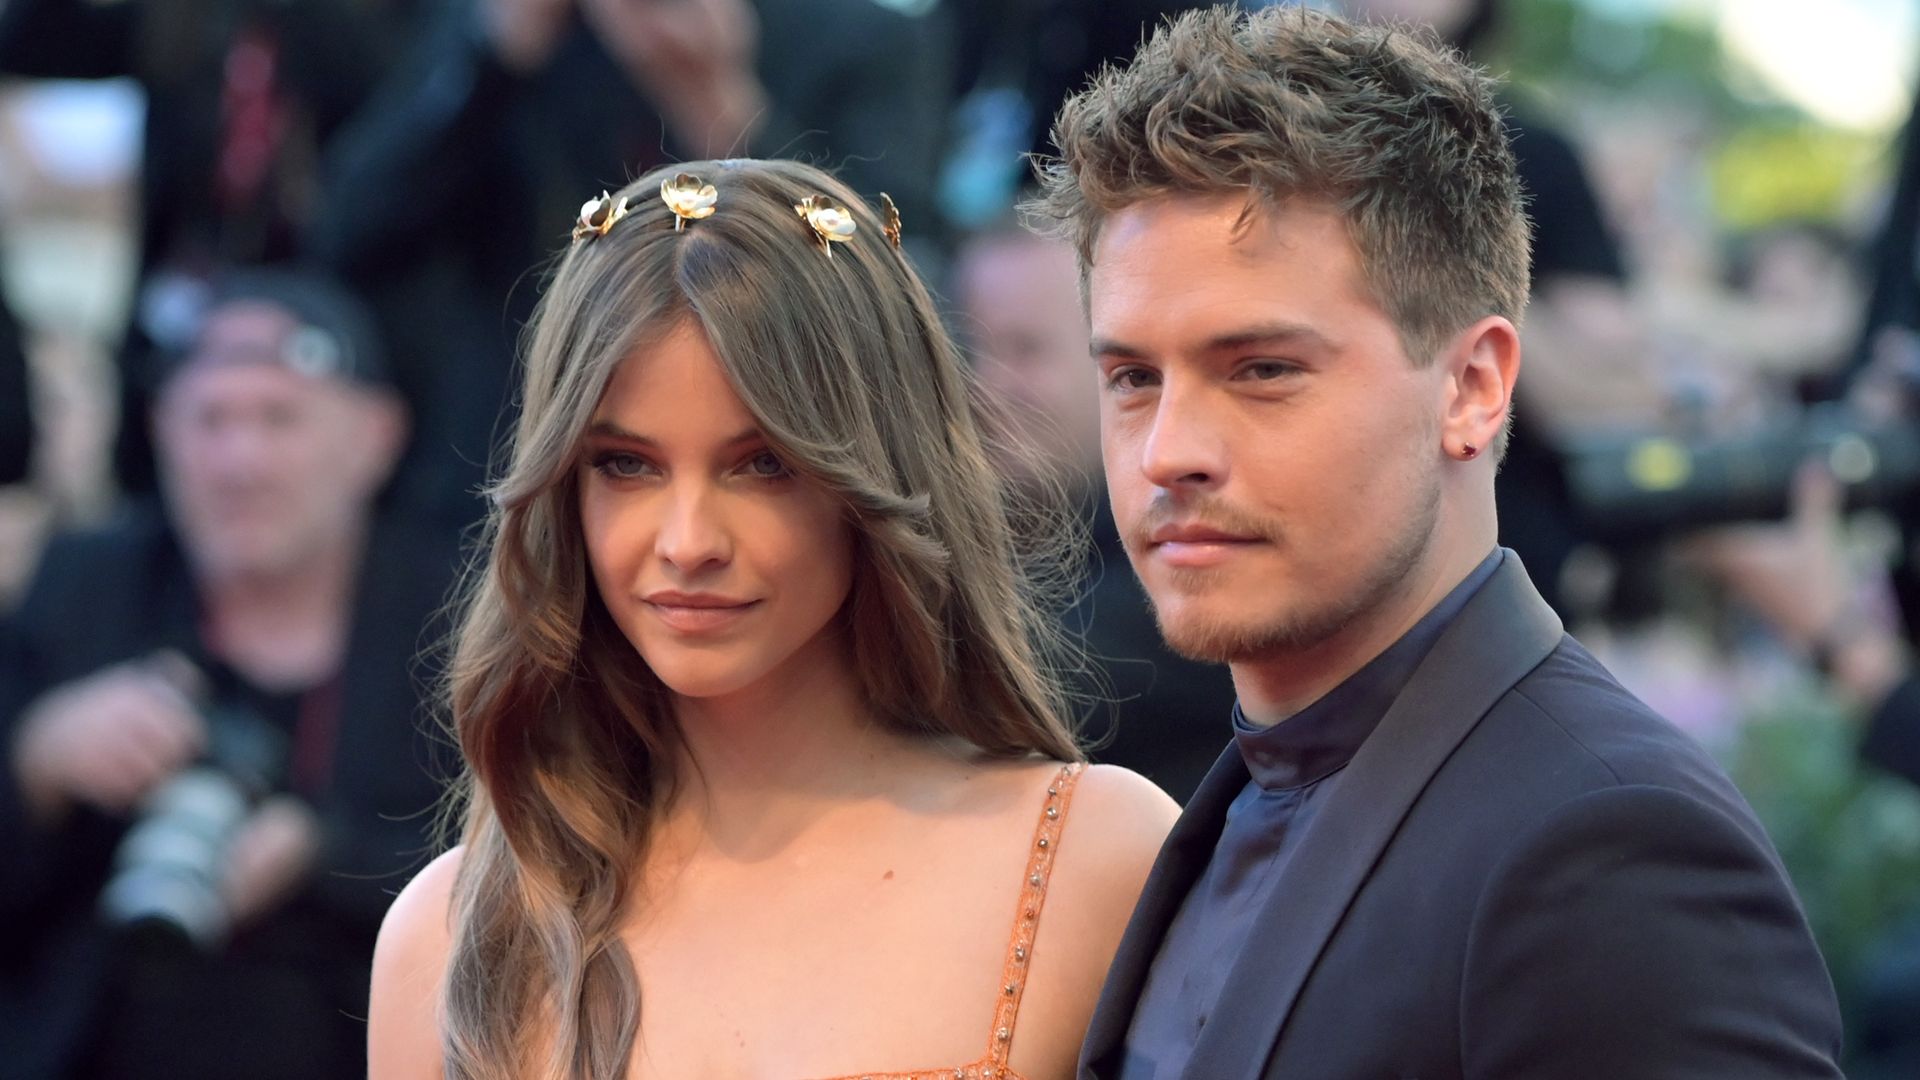 02 September 2022, Italy, Venice: Barbara Palvin and Dylan Sprouse attend the premiere of "Bones And All" during the 79th Venice International Film Festival. Photo: Stefanie Rex/dpa (Photo by Stefanie Rex/picture alliance via Getty Images)